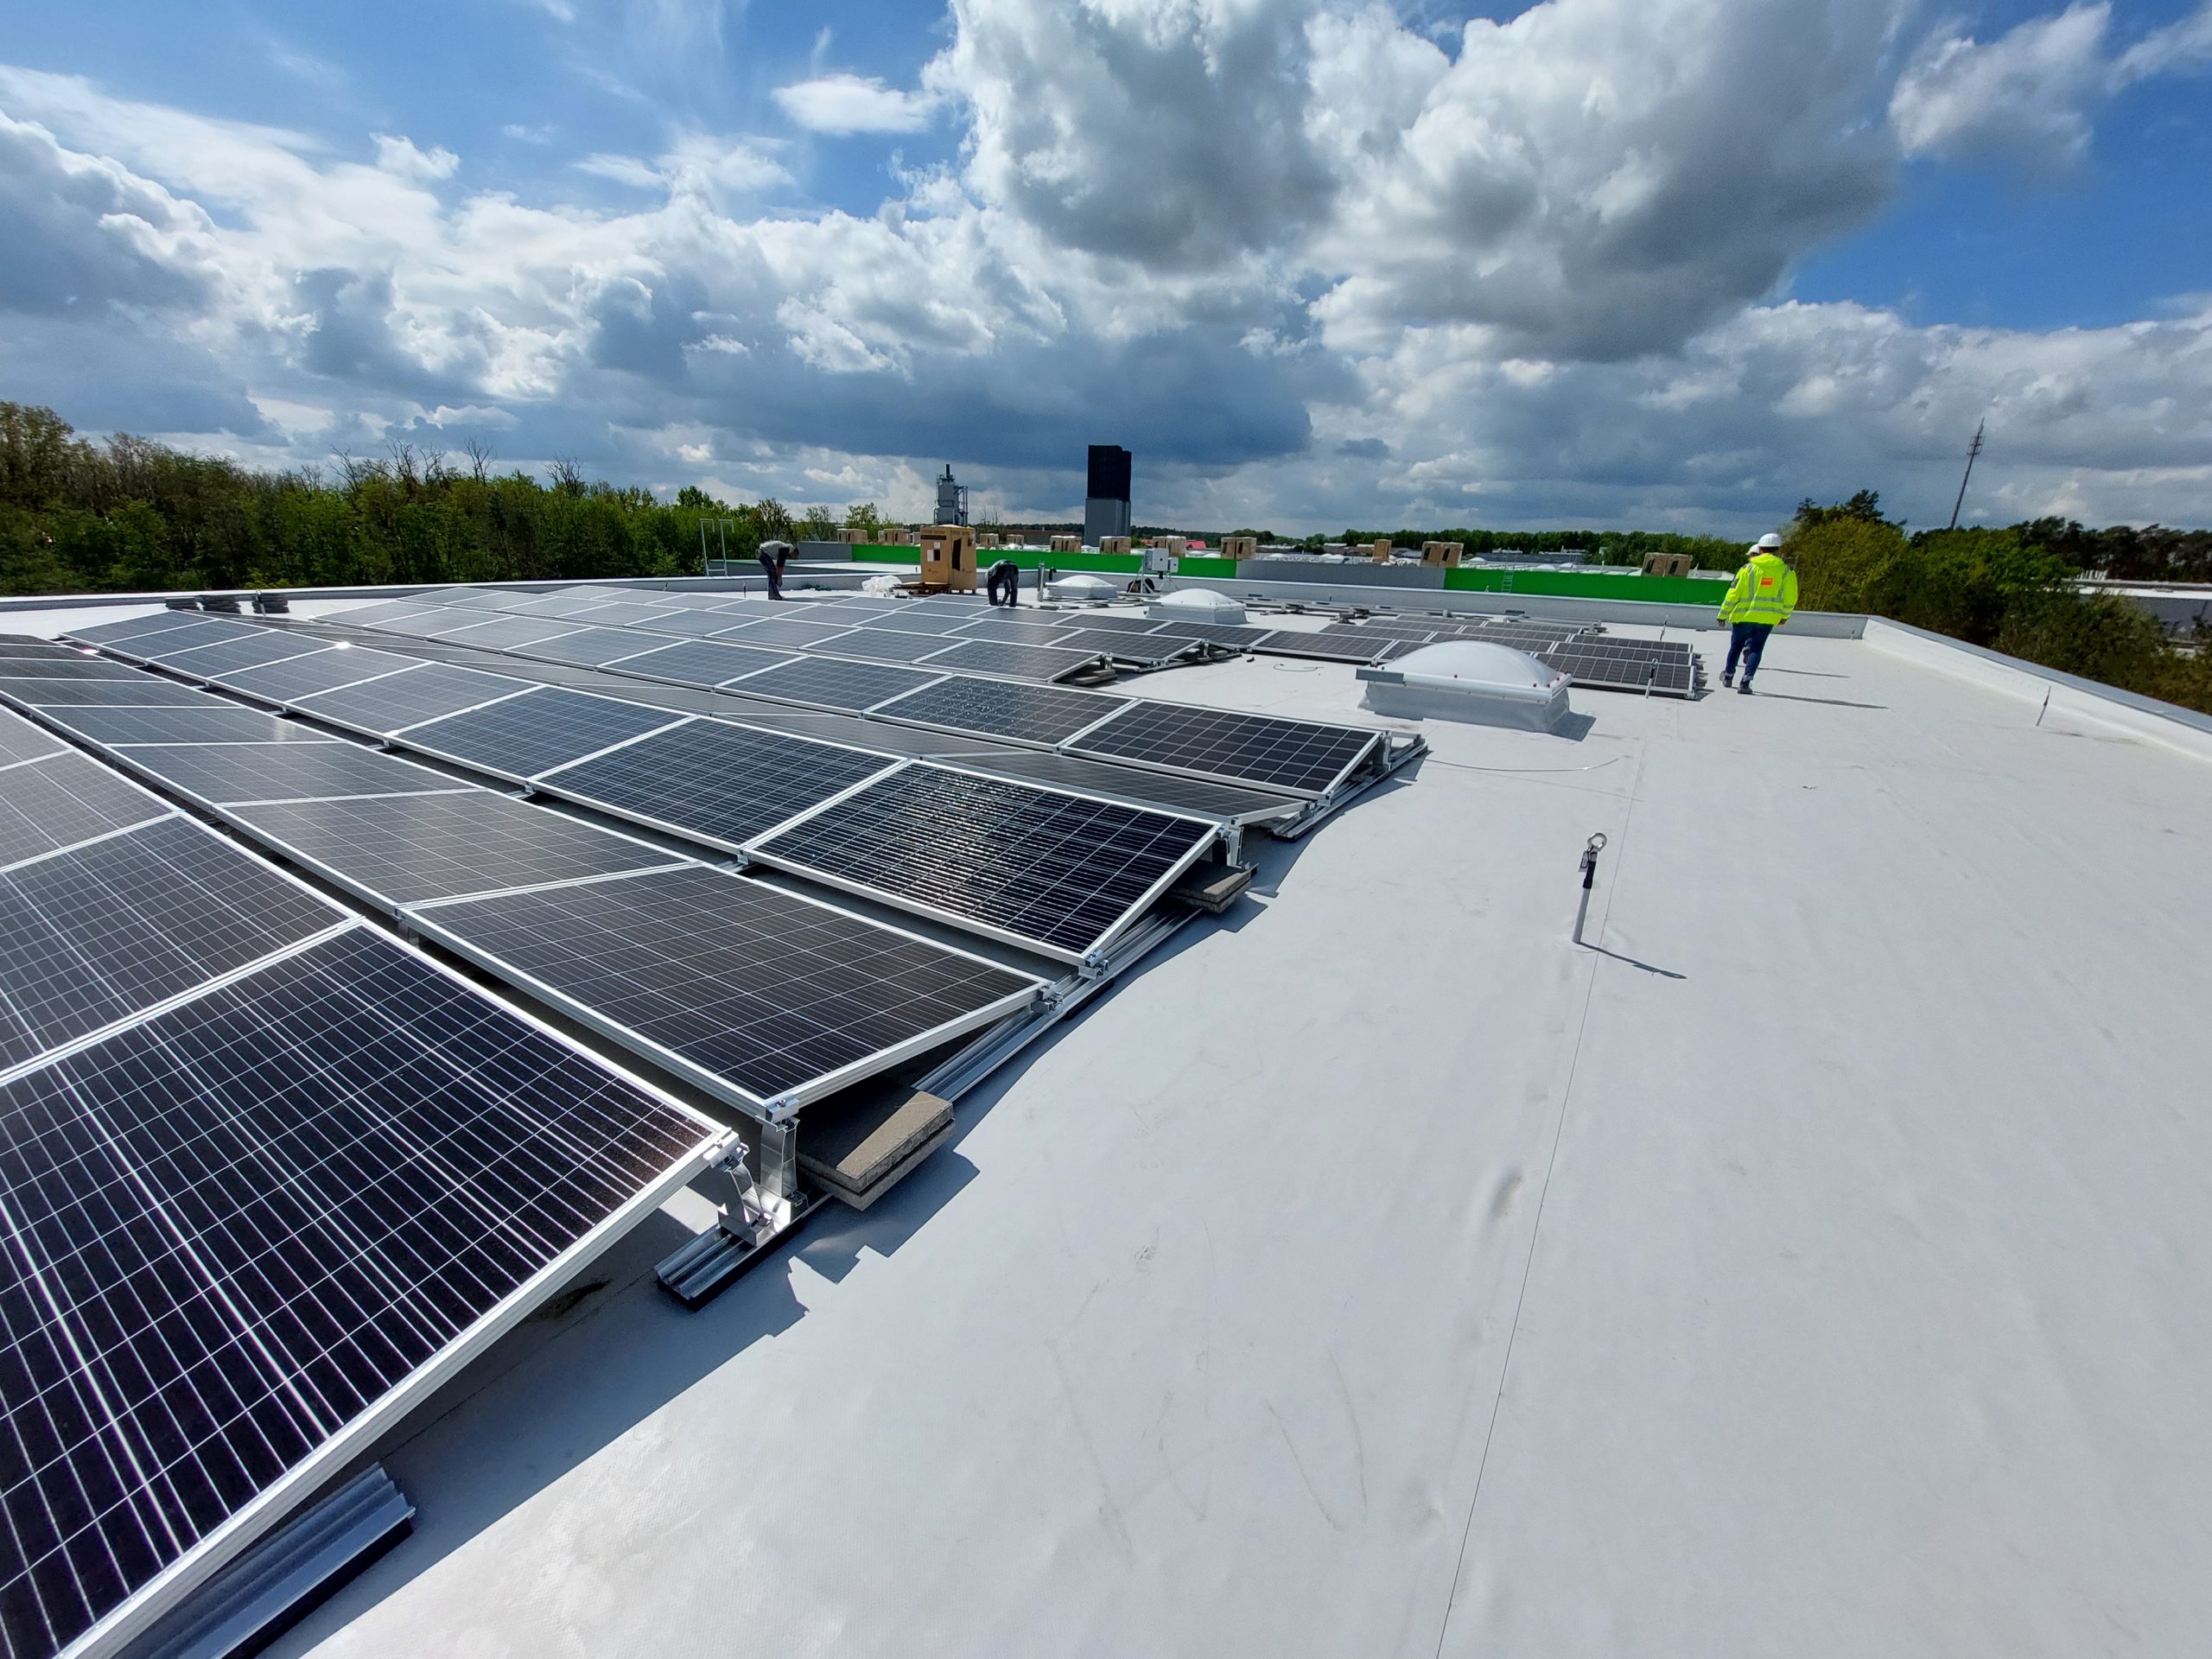 MLP Group launching Poland’s largest on-site solar PV project